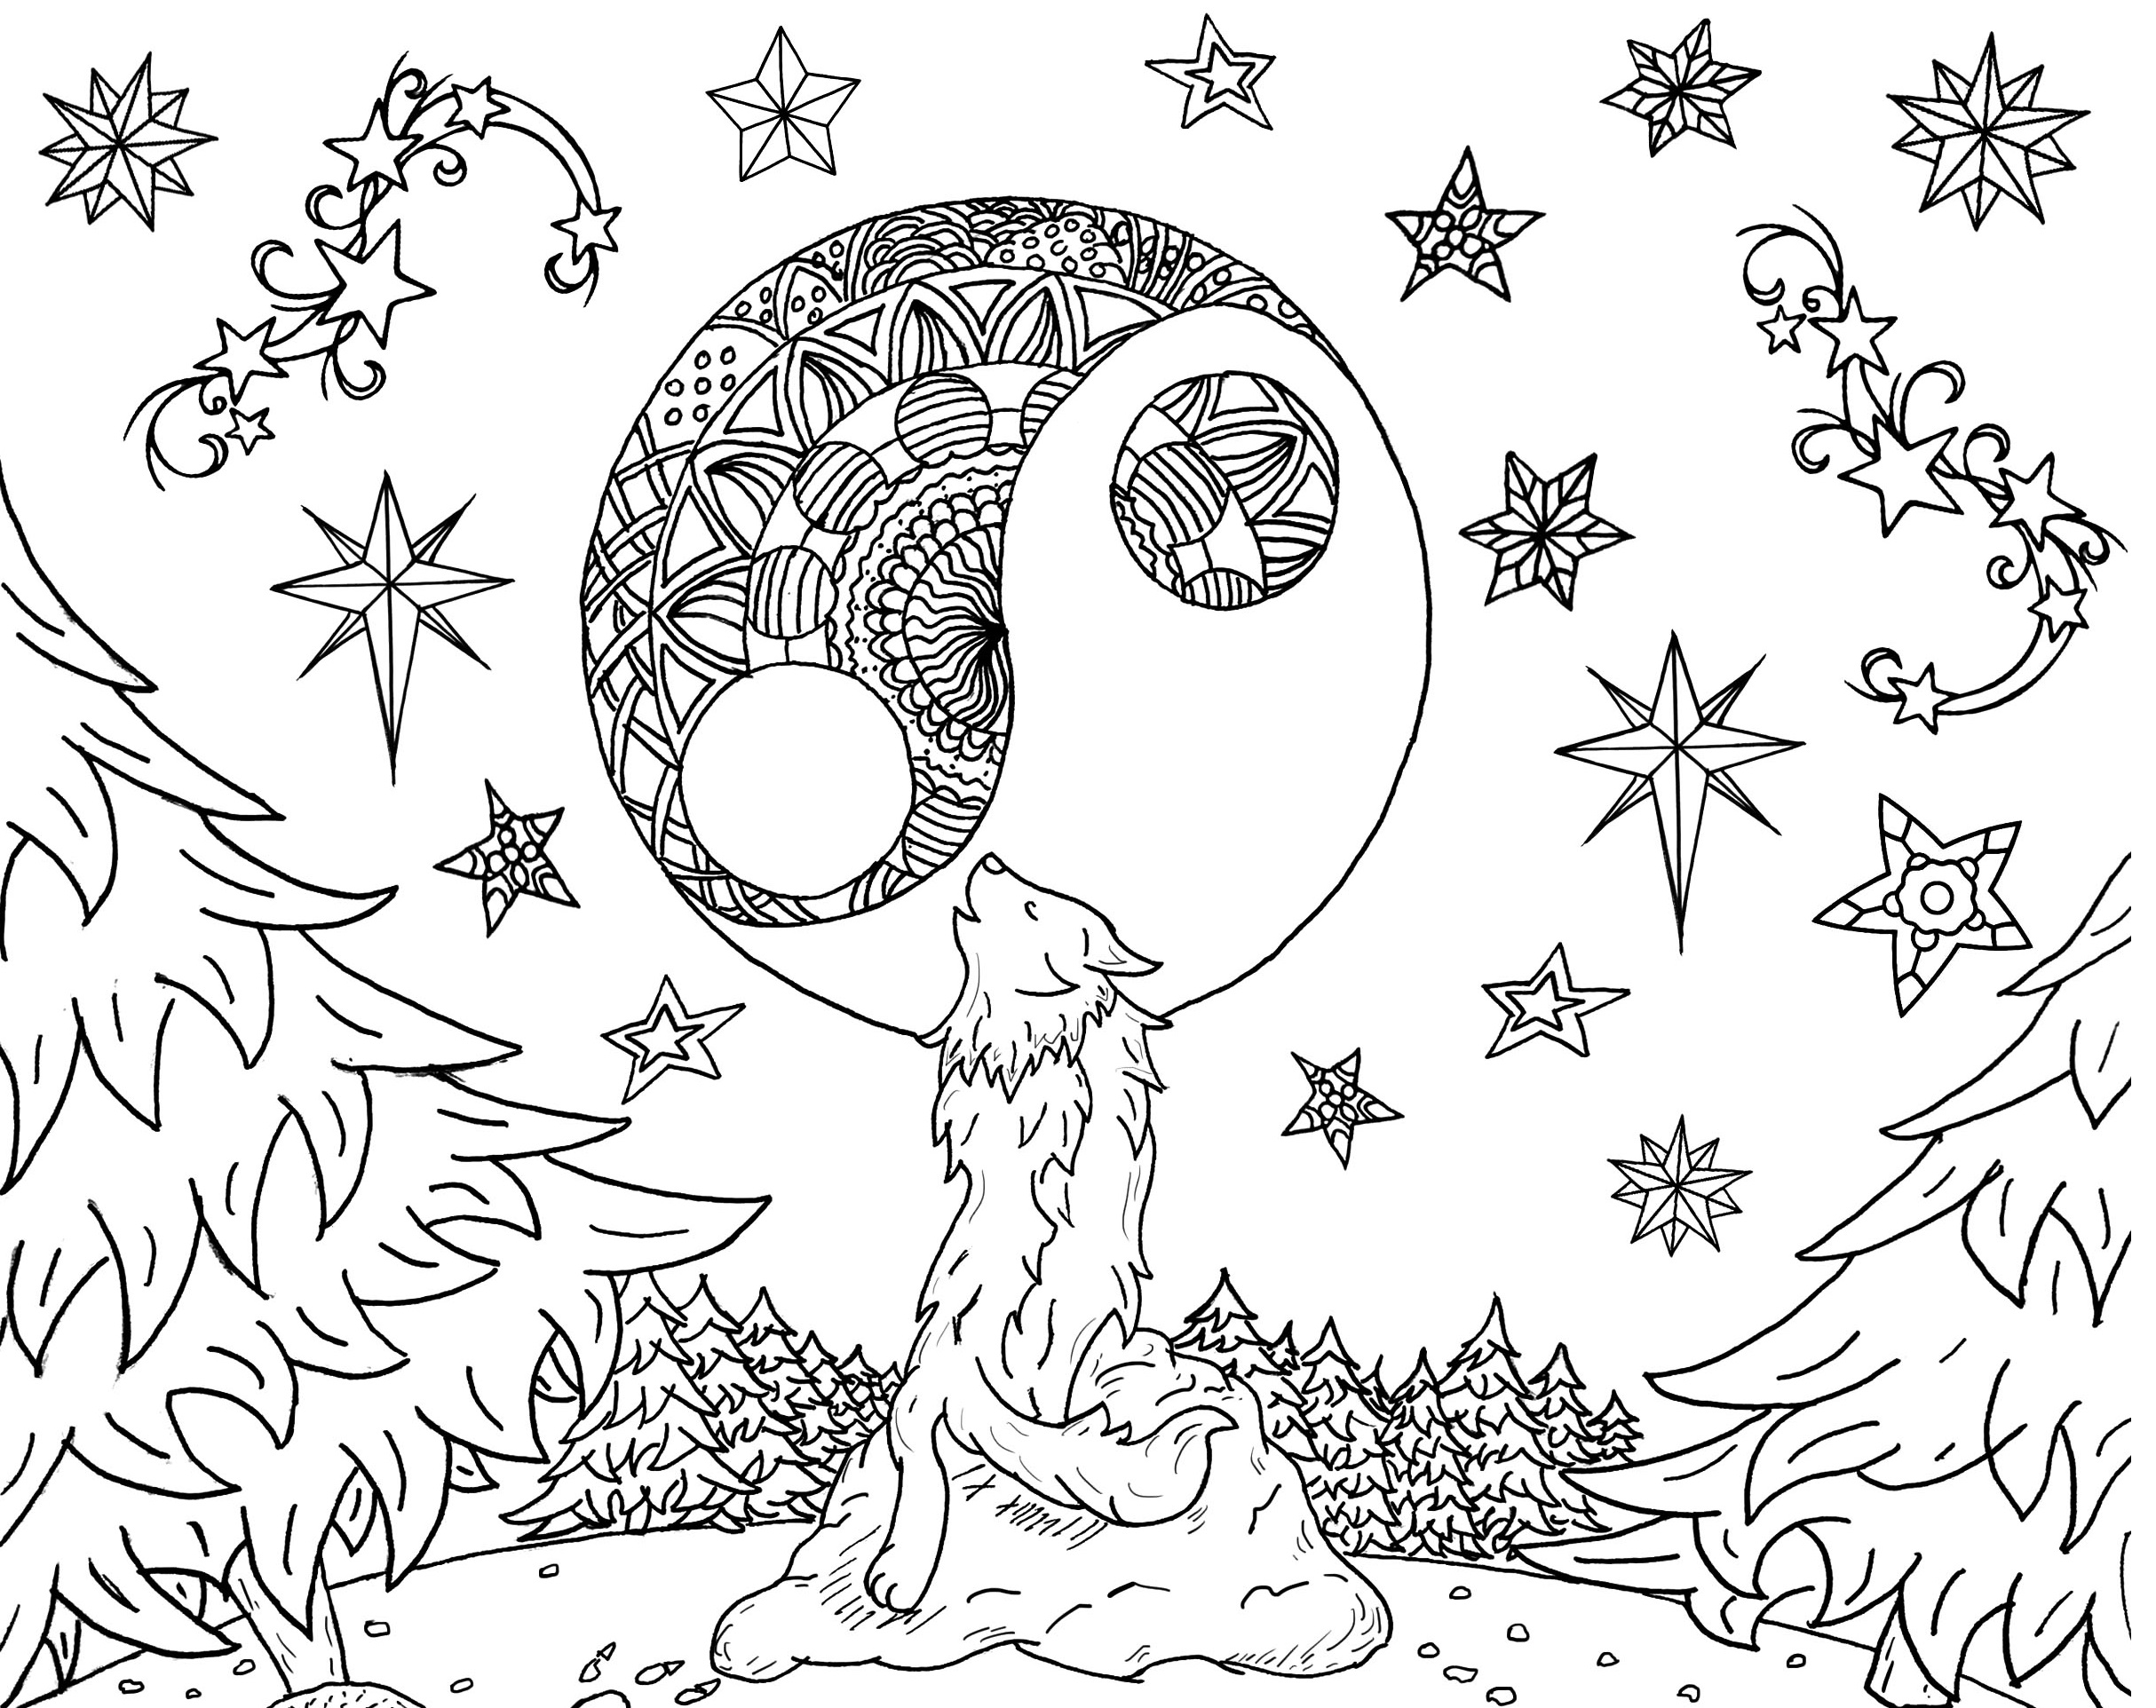 Wolf and Moon (Mandala) Coloring Page for Adults - SheetalColor.com